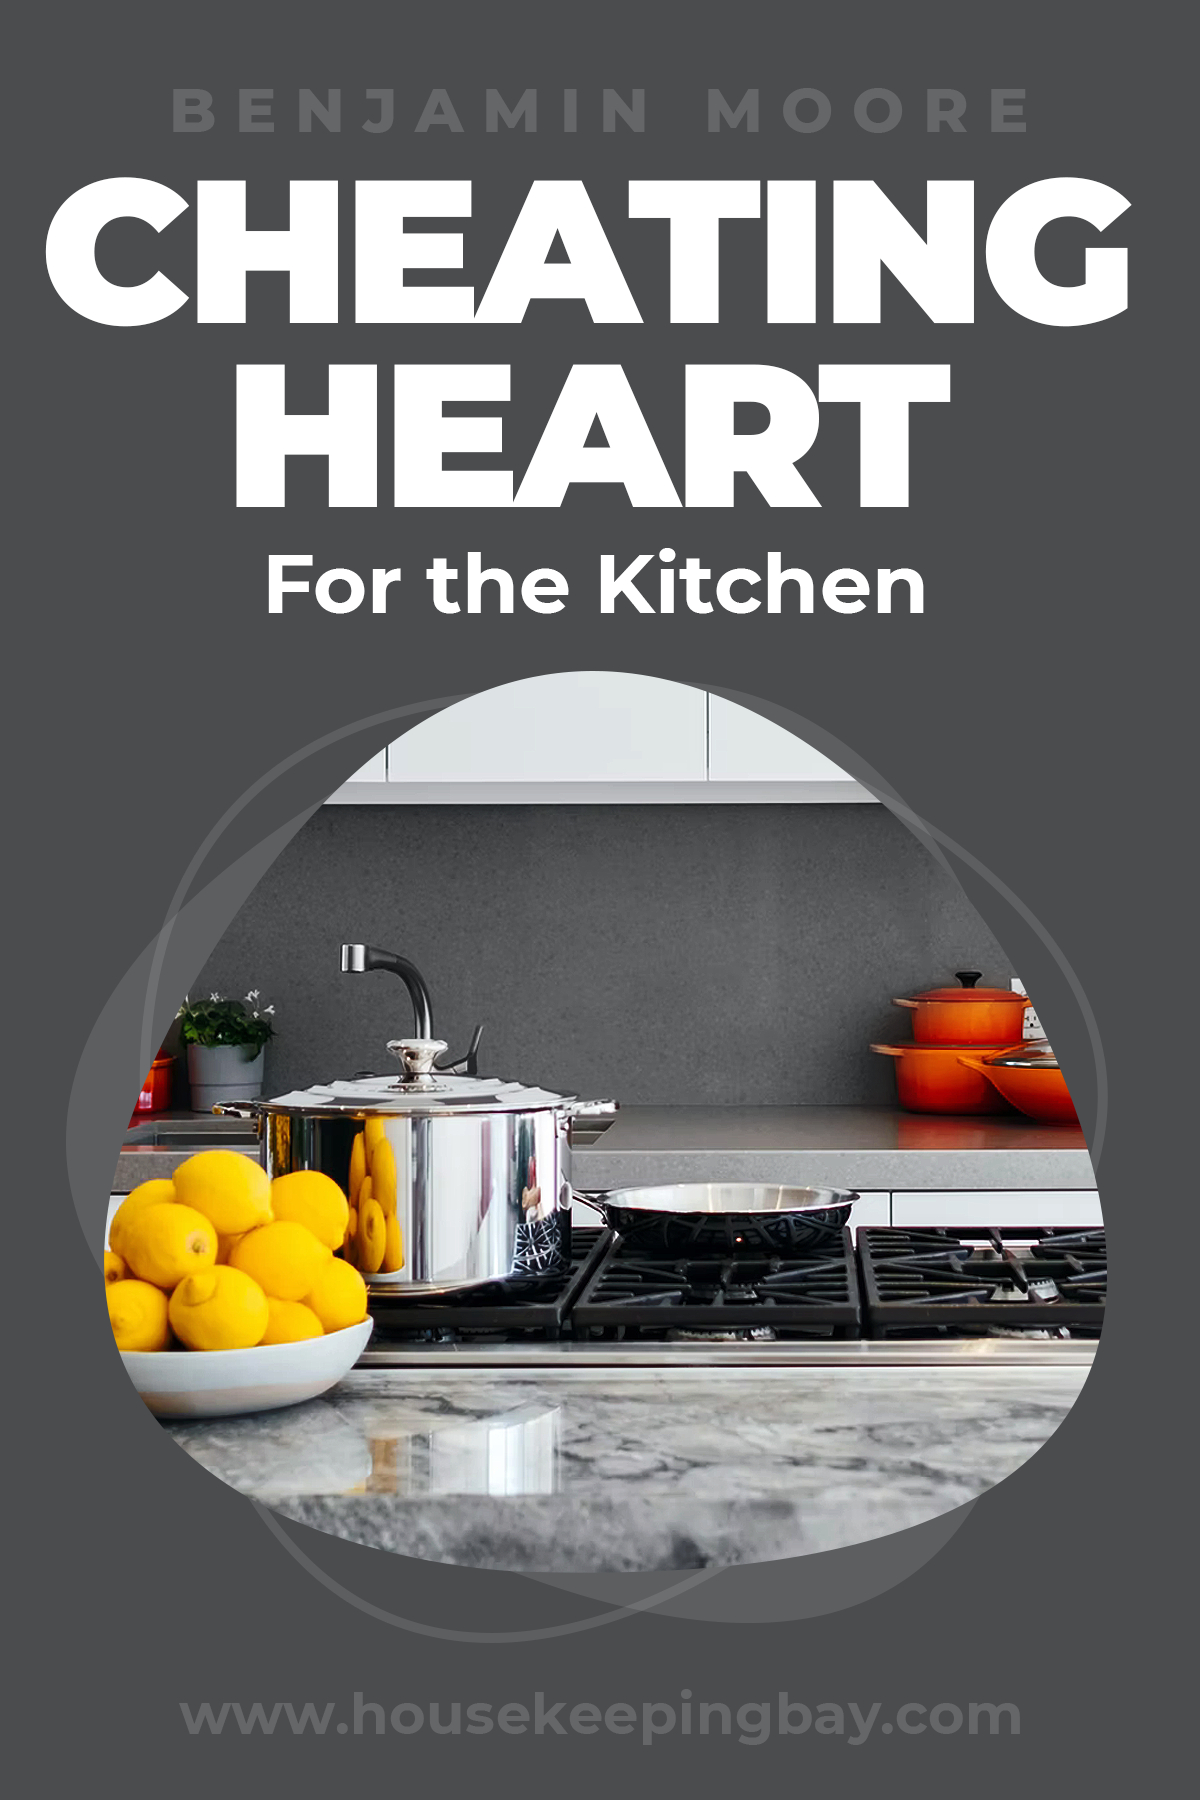 Cheating Heart for the kitchen